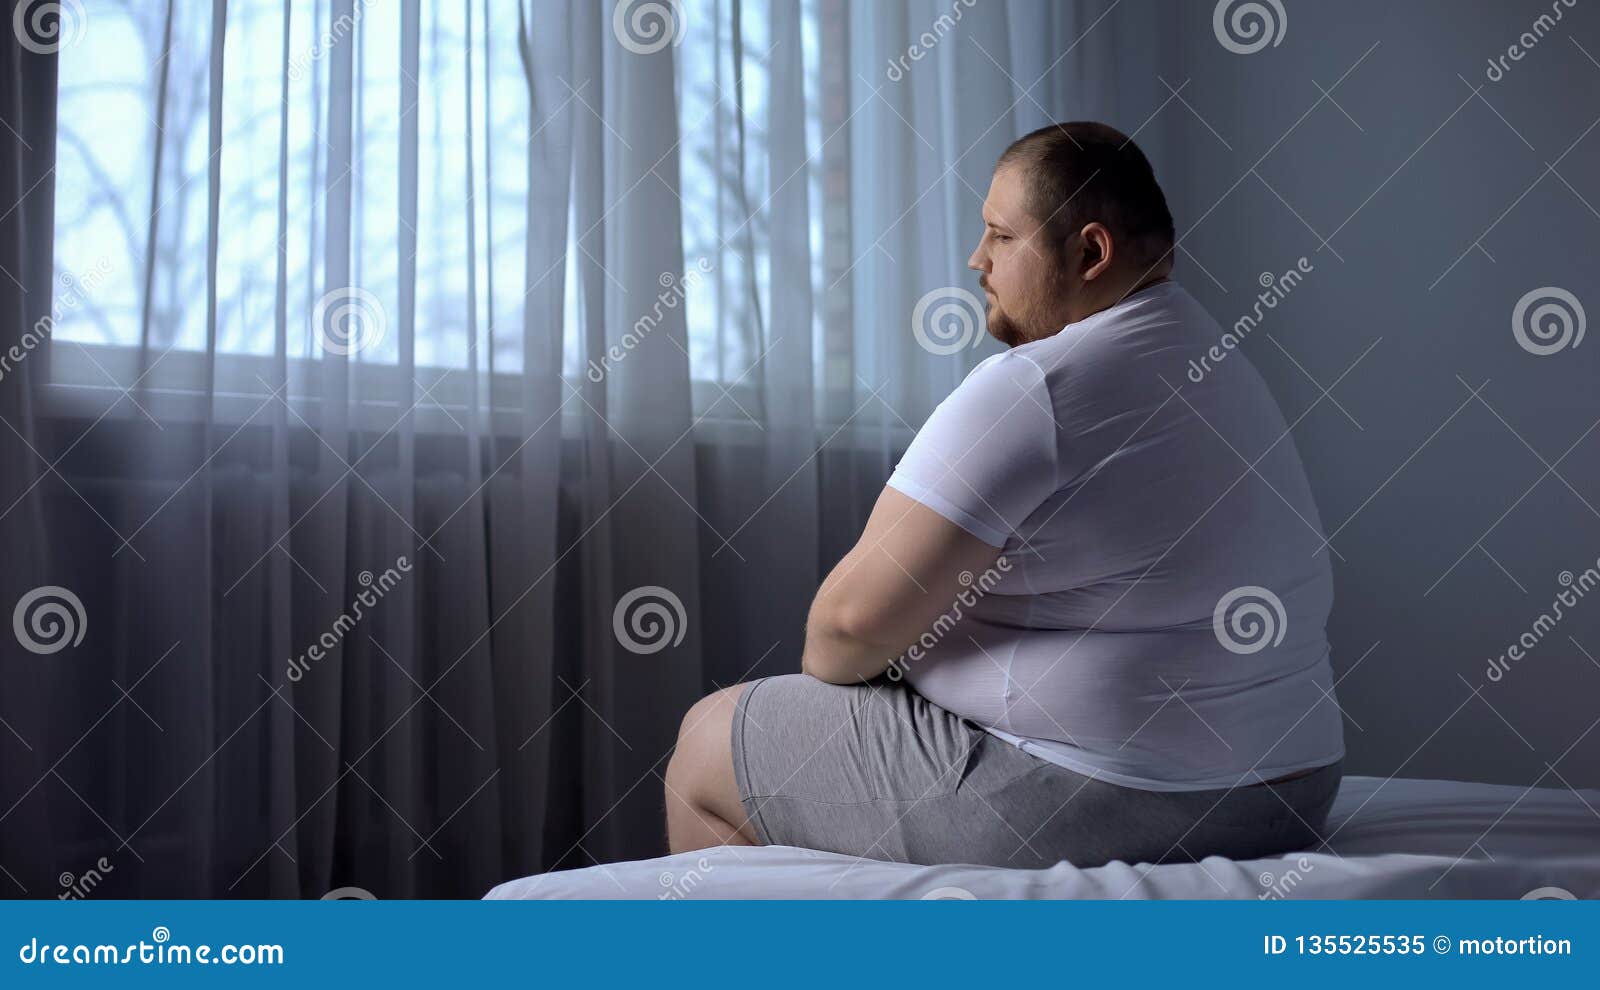 depressed fat man sitting on bed at home, worried about overweight, insecurities